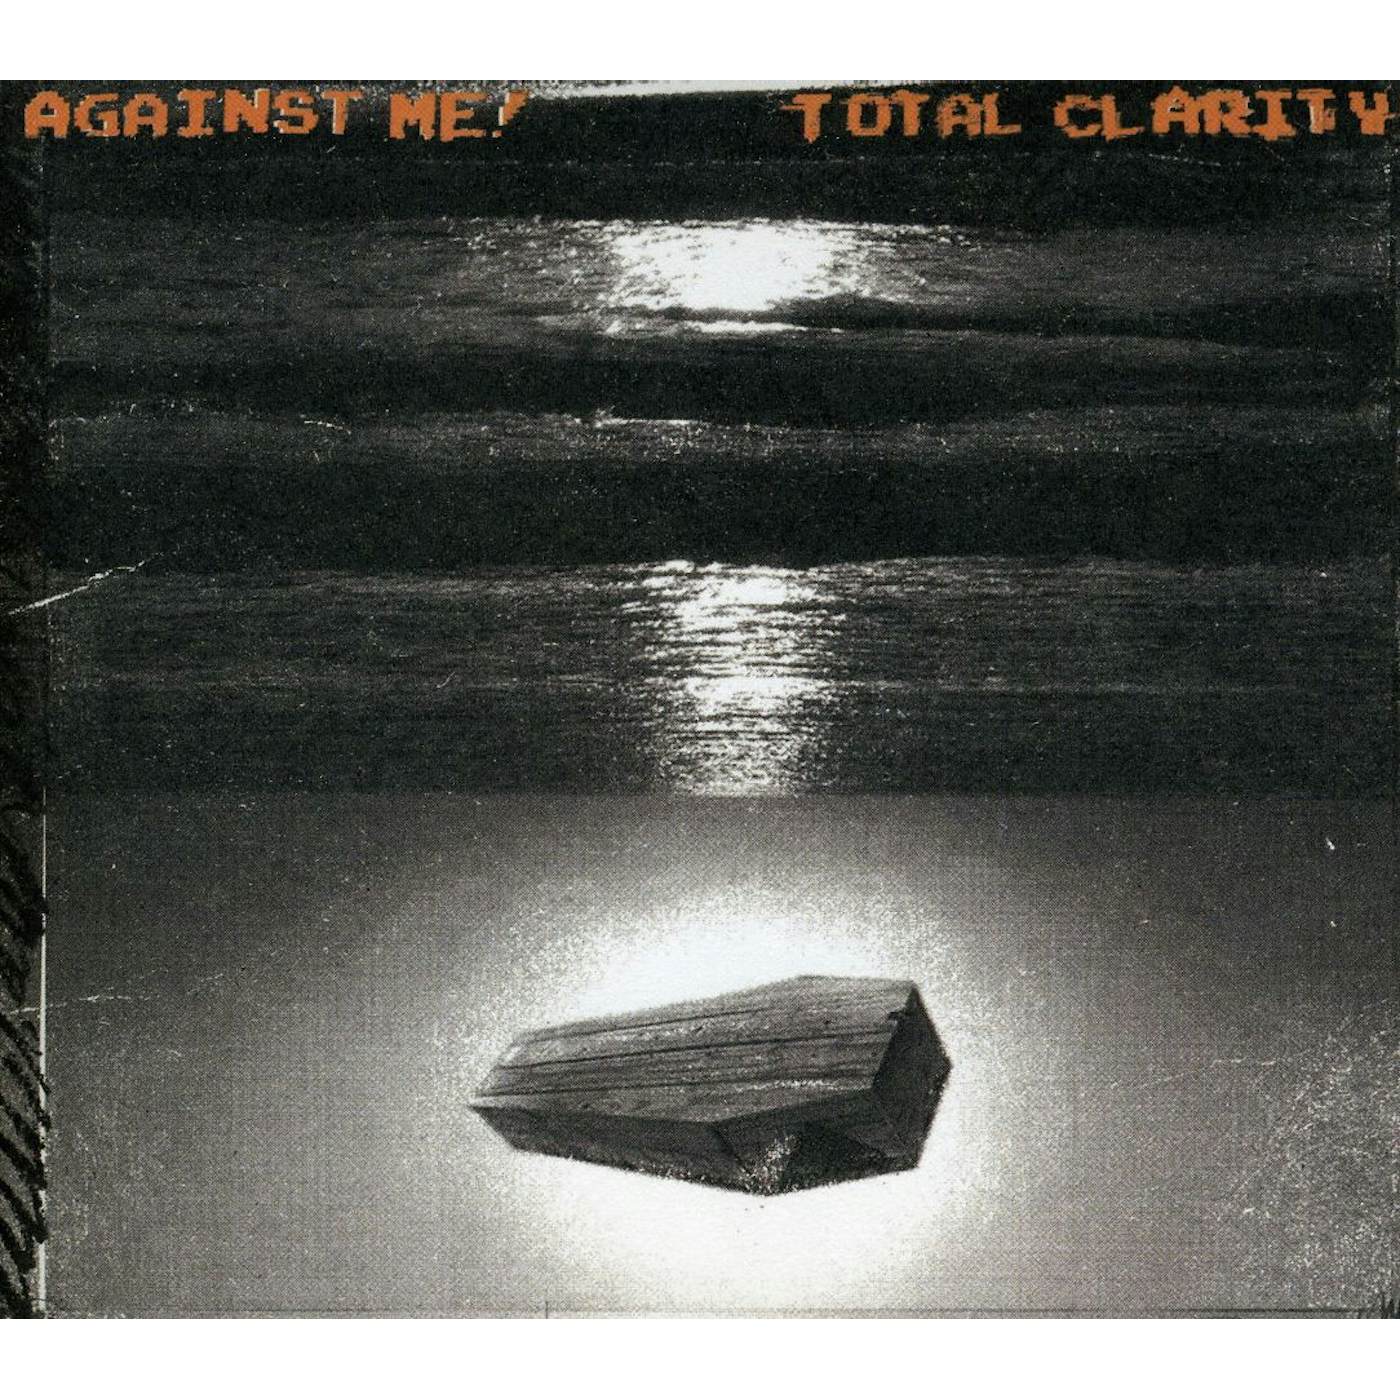 Against Me! TOTAL CLARITY CD